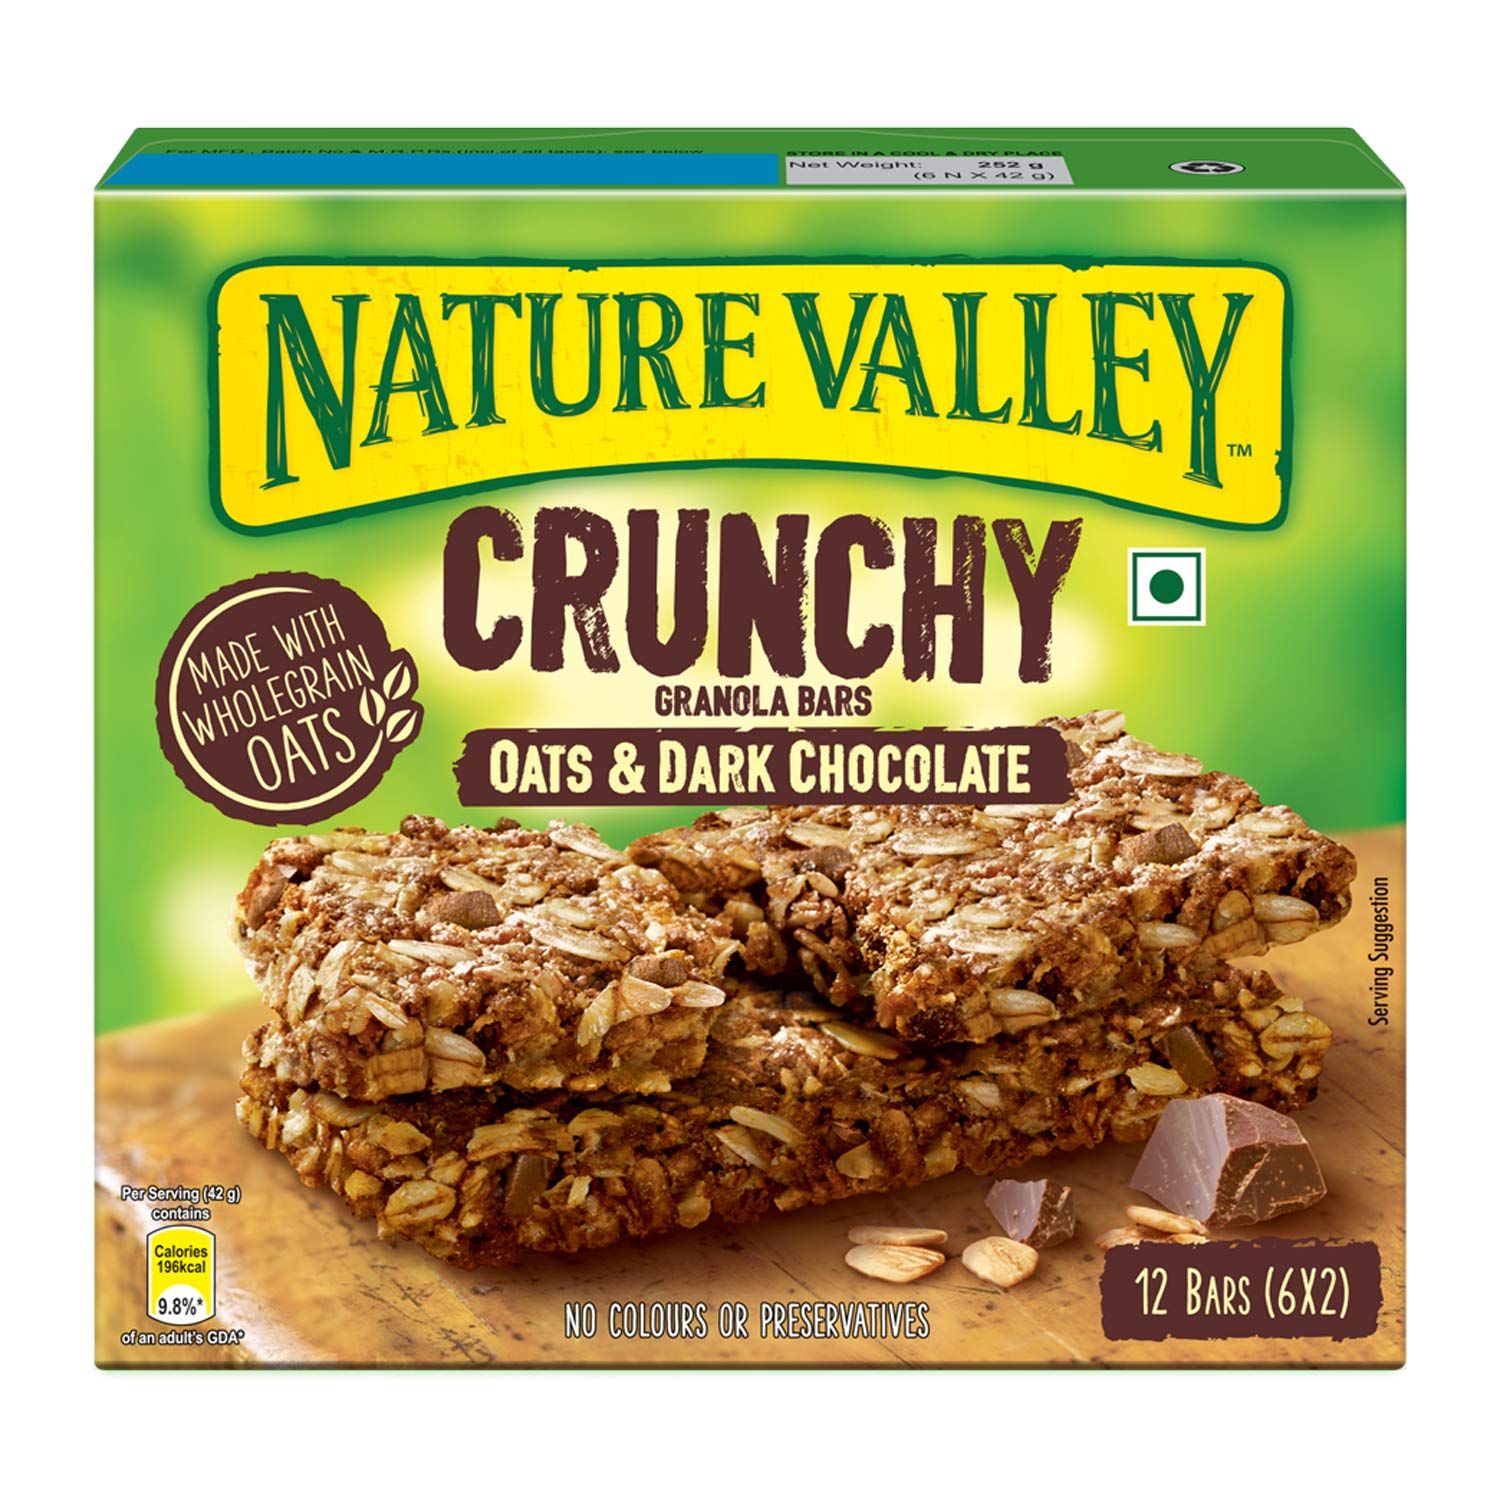 Nature Valley Crunchy Oats & Dark Chocolate Image